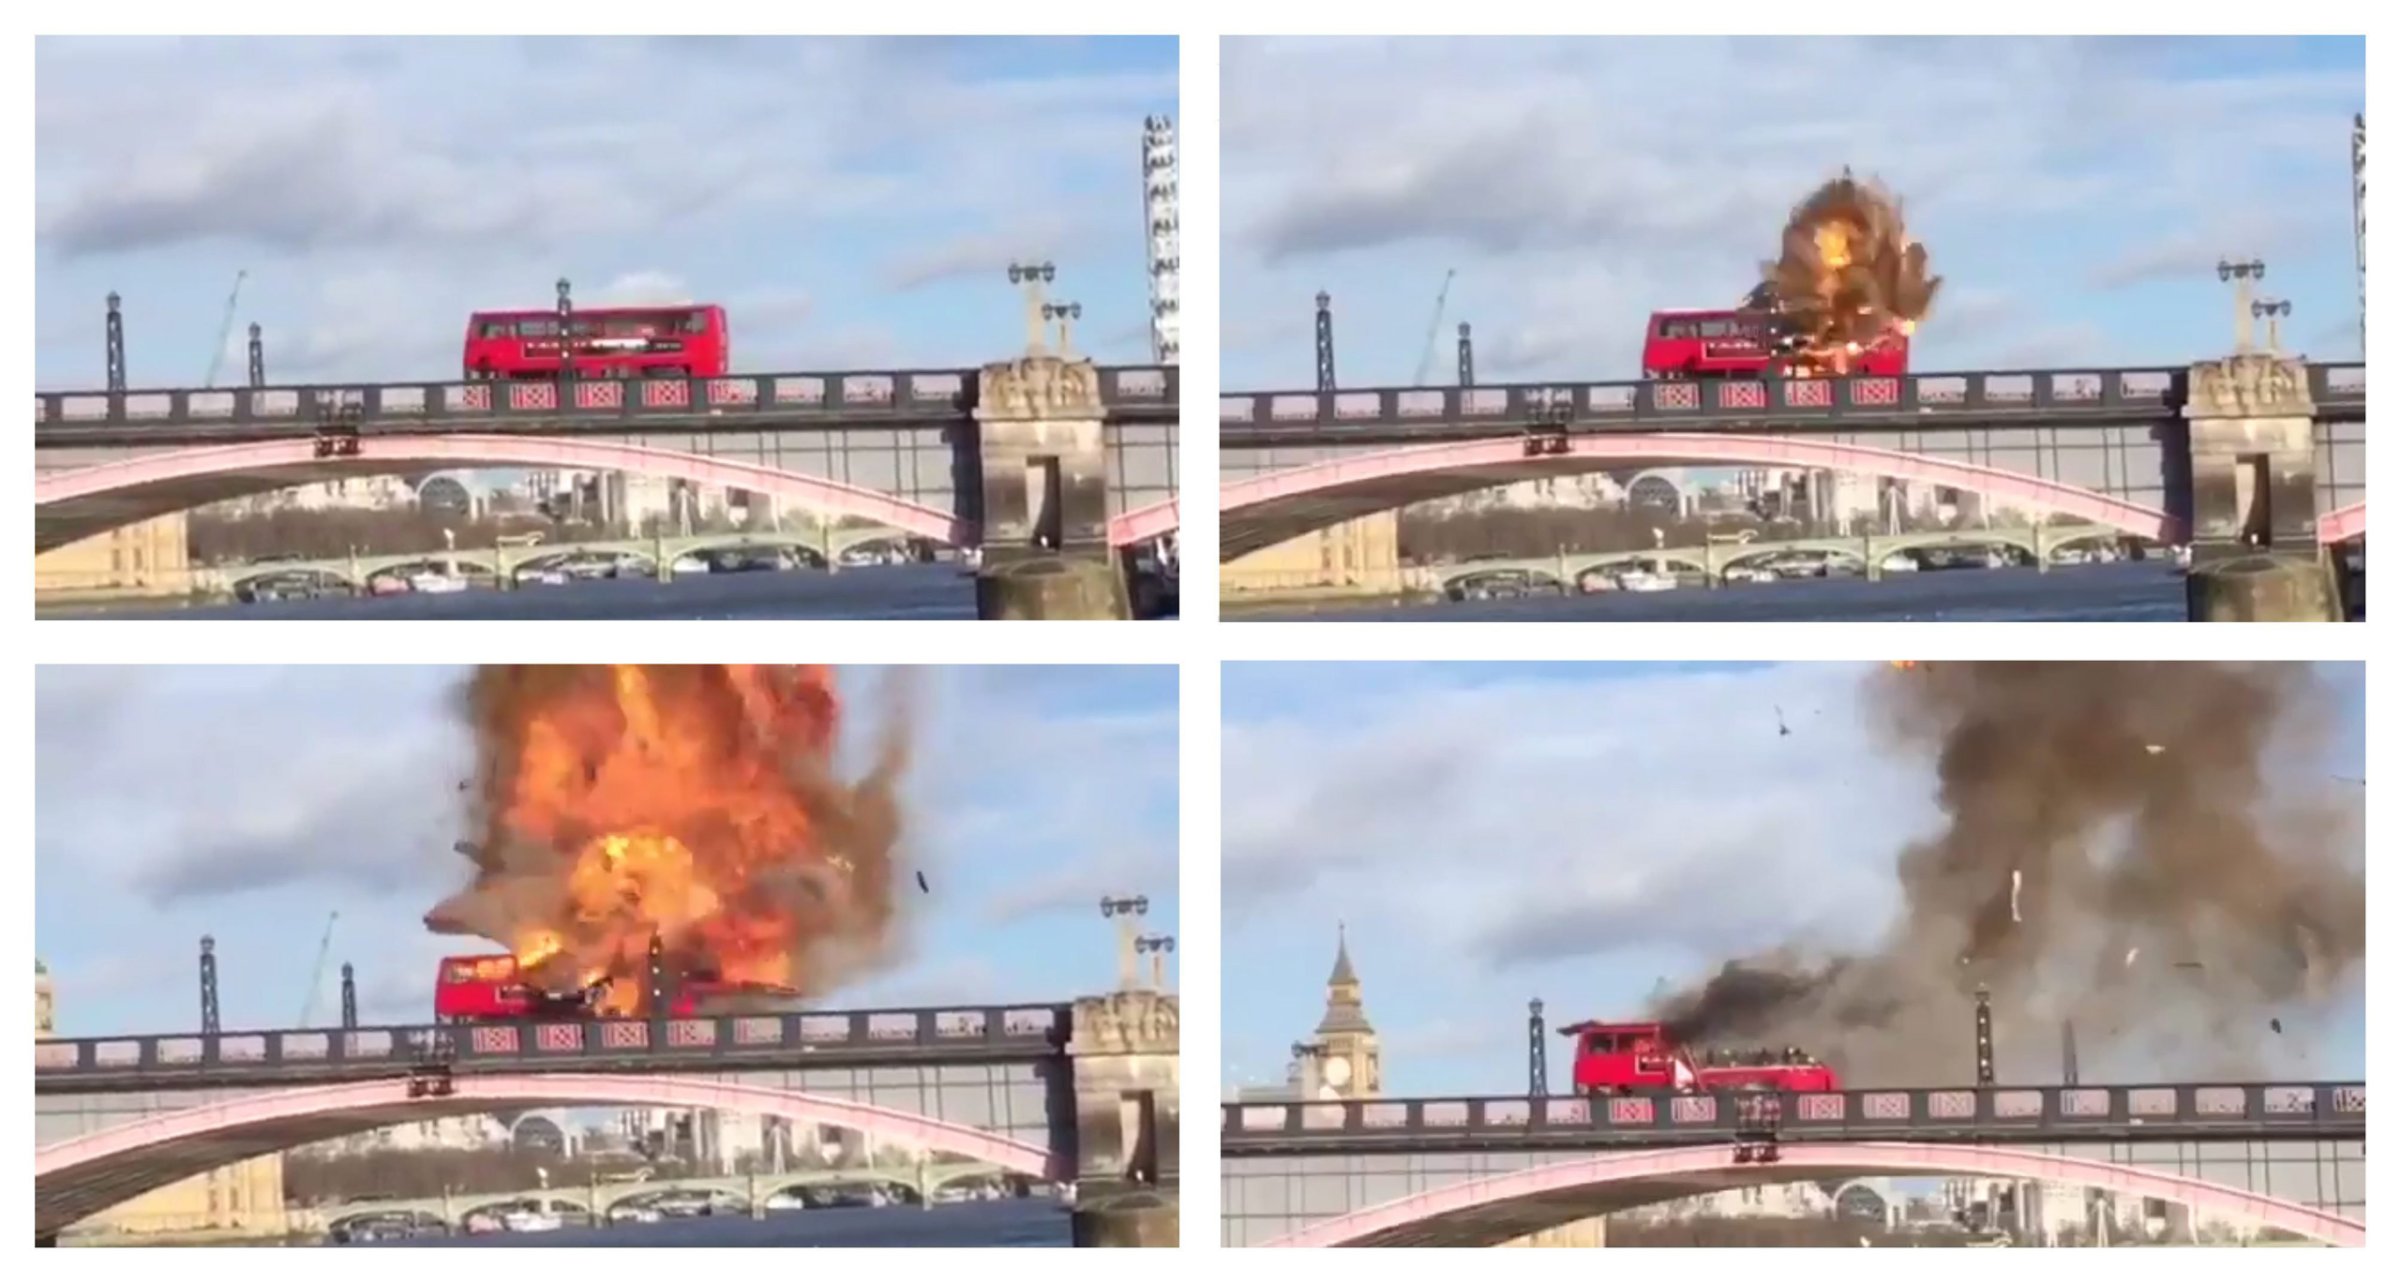 epa05149922 A handout composite picture taken from a video provided by the London Fire Brigade on 08 February 2016 shows a London double-decker bus exploding during the filming of a movie on Lambeth Bridge in London, Britain, 07 February 2016. According to reports, onlookers were fearing a terrorist attack when a bus exploded intentionally for a movie. Reports state the stunt was performed during the filming of 'The Foreigner' starring Jackie Chan. EPA/LAMBETH/LONDON FIRE BRIGADE/HANDOUT MANDATORY CREDIT: LONDON FIRE BRIGADE. BEST QUALITY AVAILABLE. HANDOUT EDITORIAL USE ONLY/NO SALES